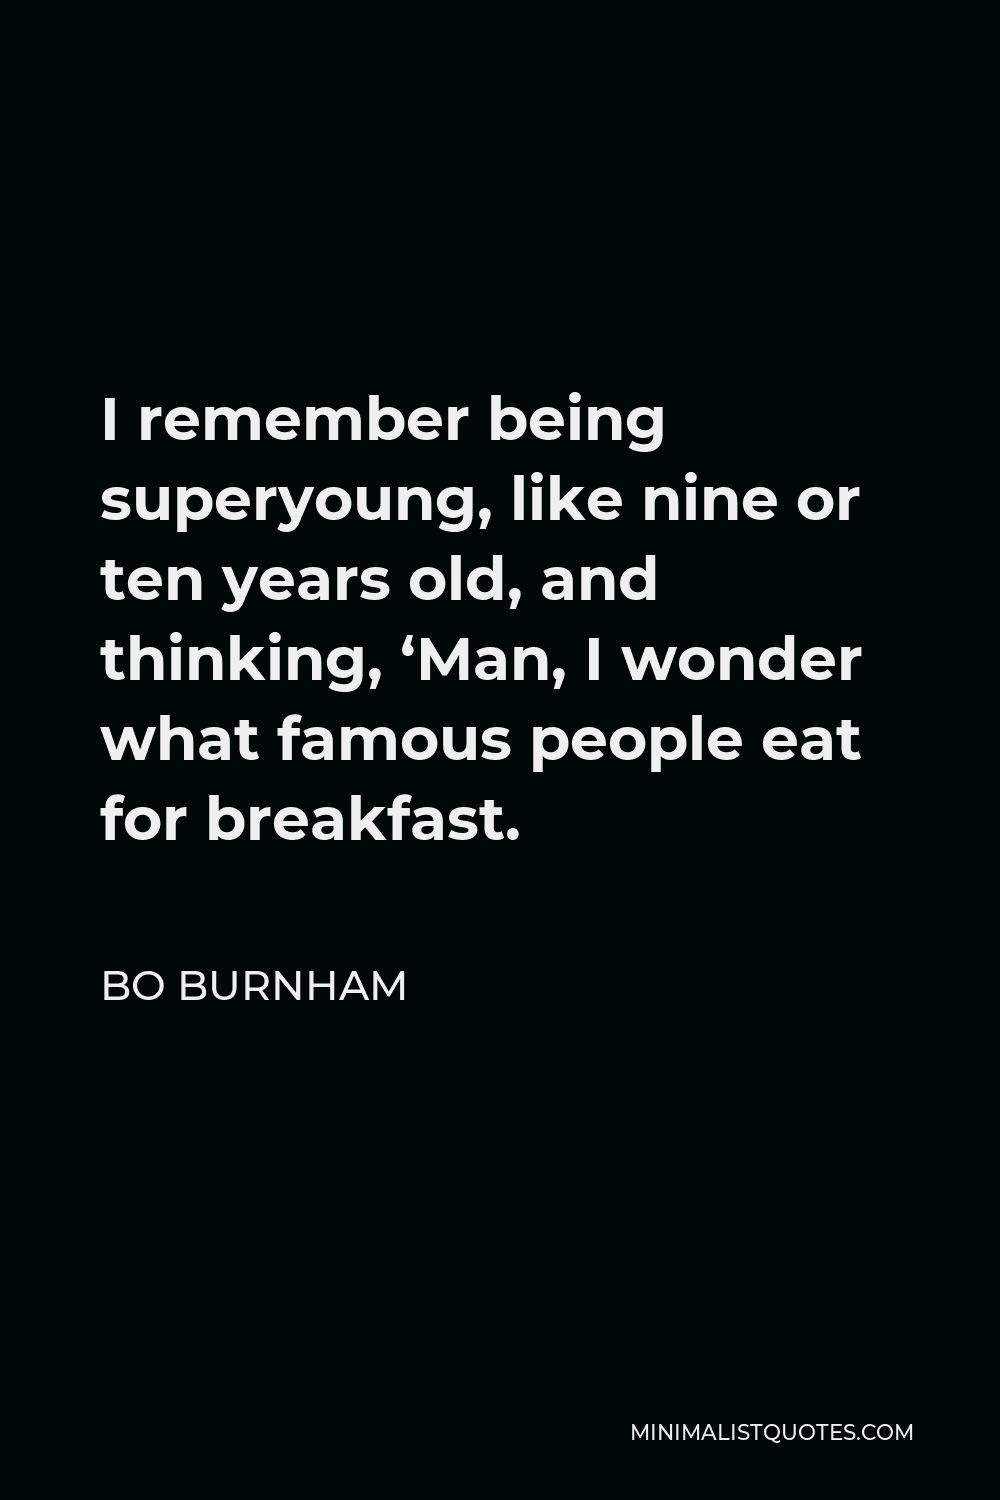 Bo Burnham Quote - I remember being superyoung, like nine or ten years old, and thinking, ‘Man, I wonder what famous people eat for breakfast.